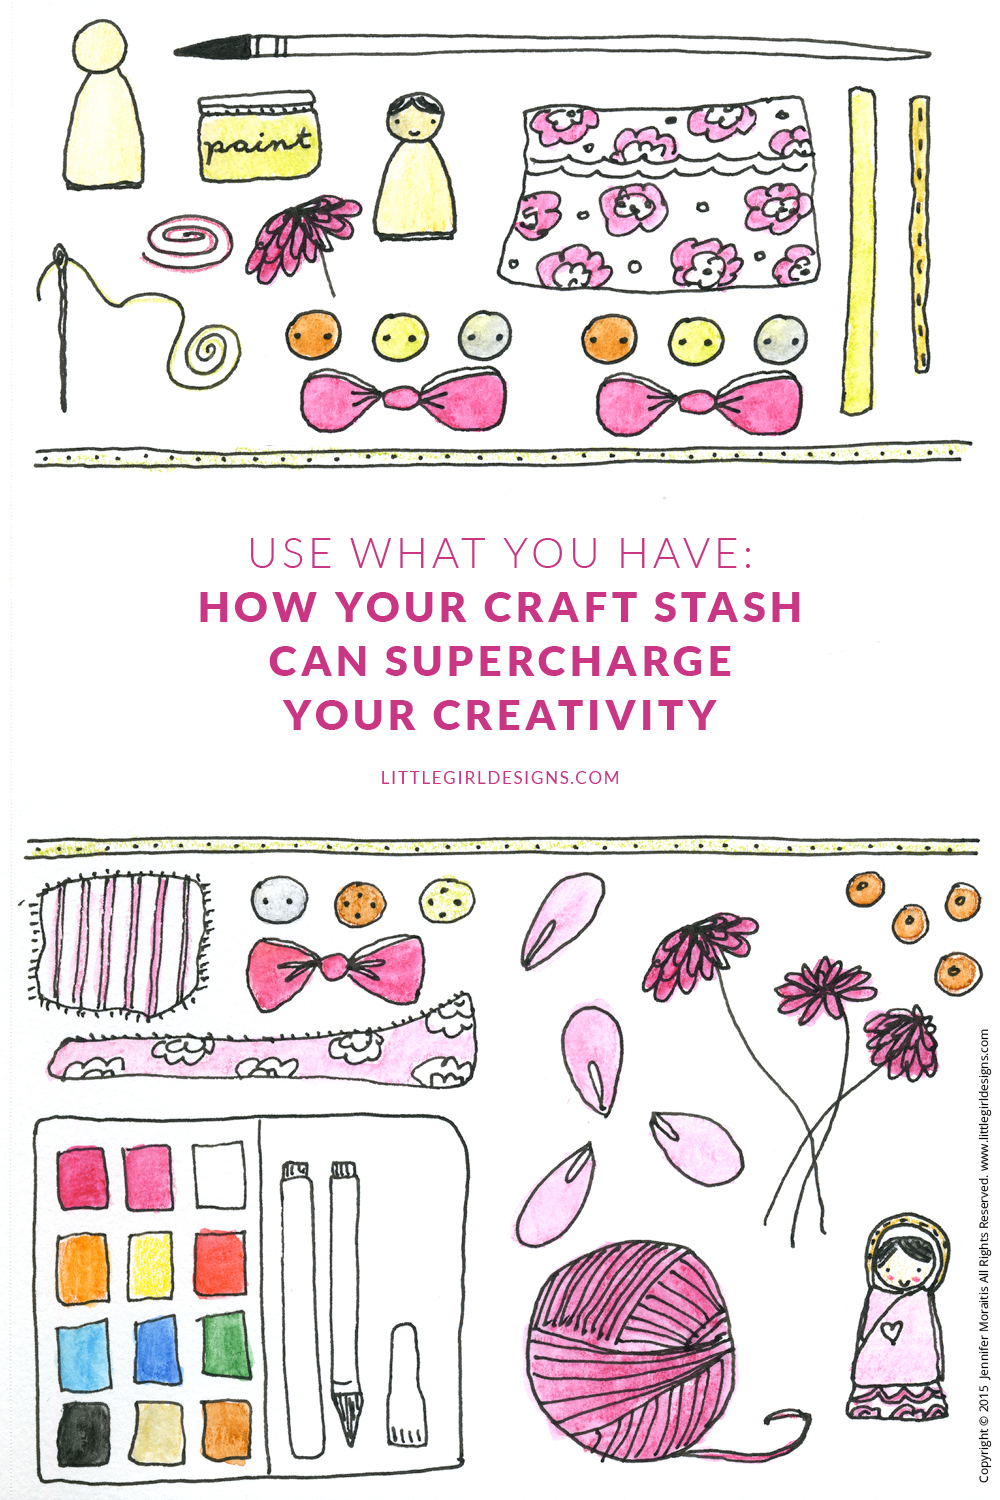 Use What You Have: How Your Craft Stash Can Supercharge Your Creativity